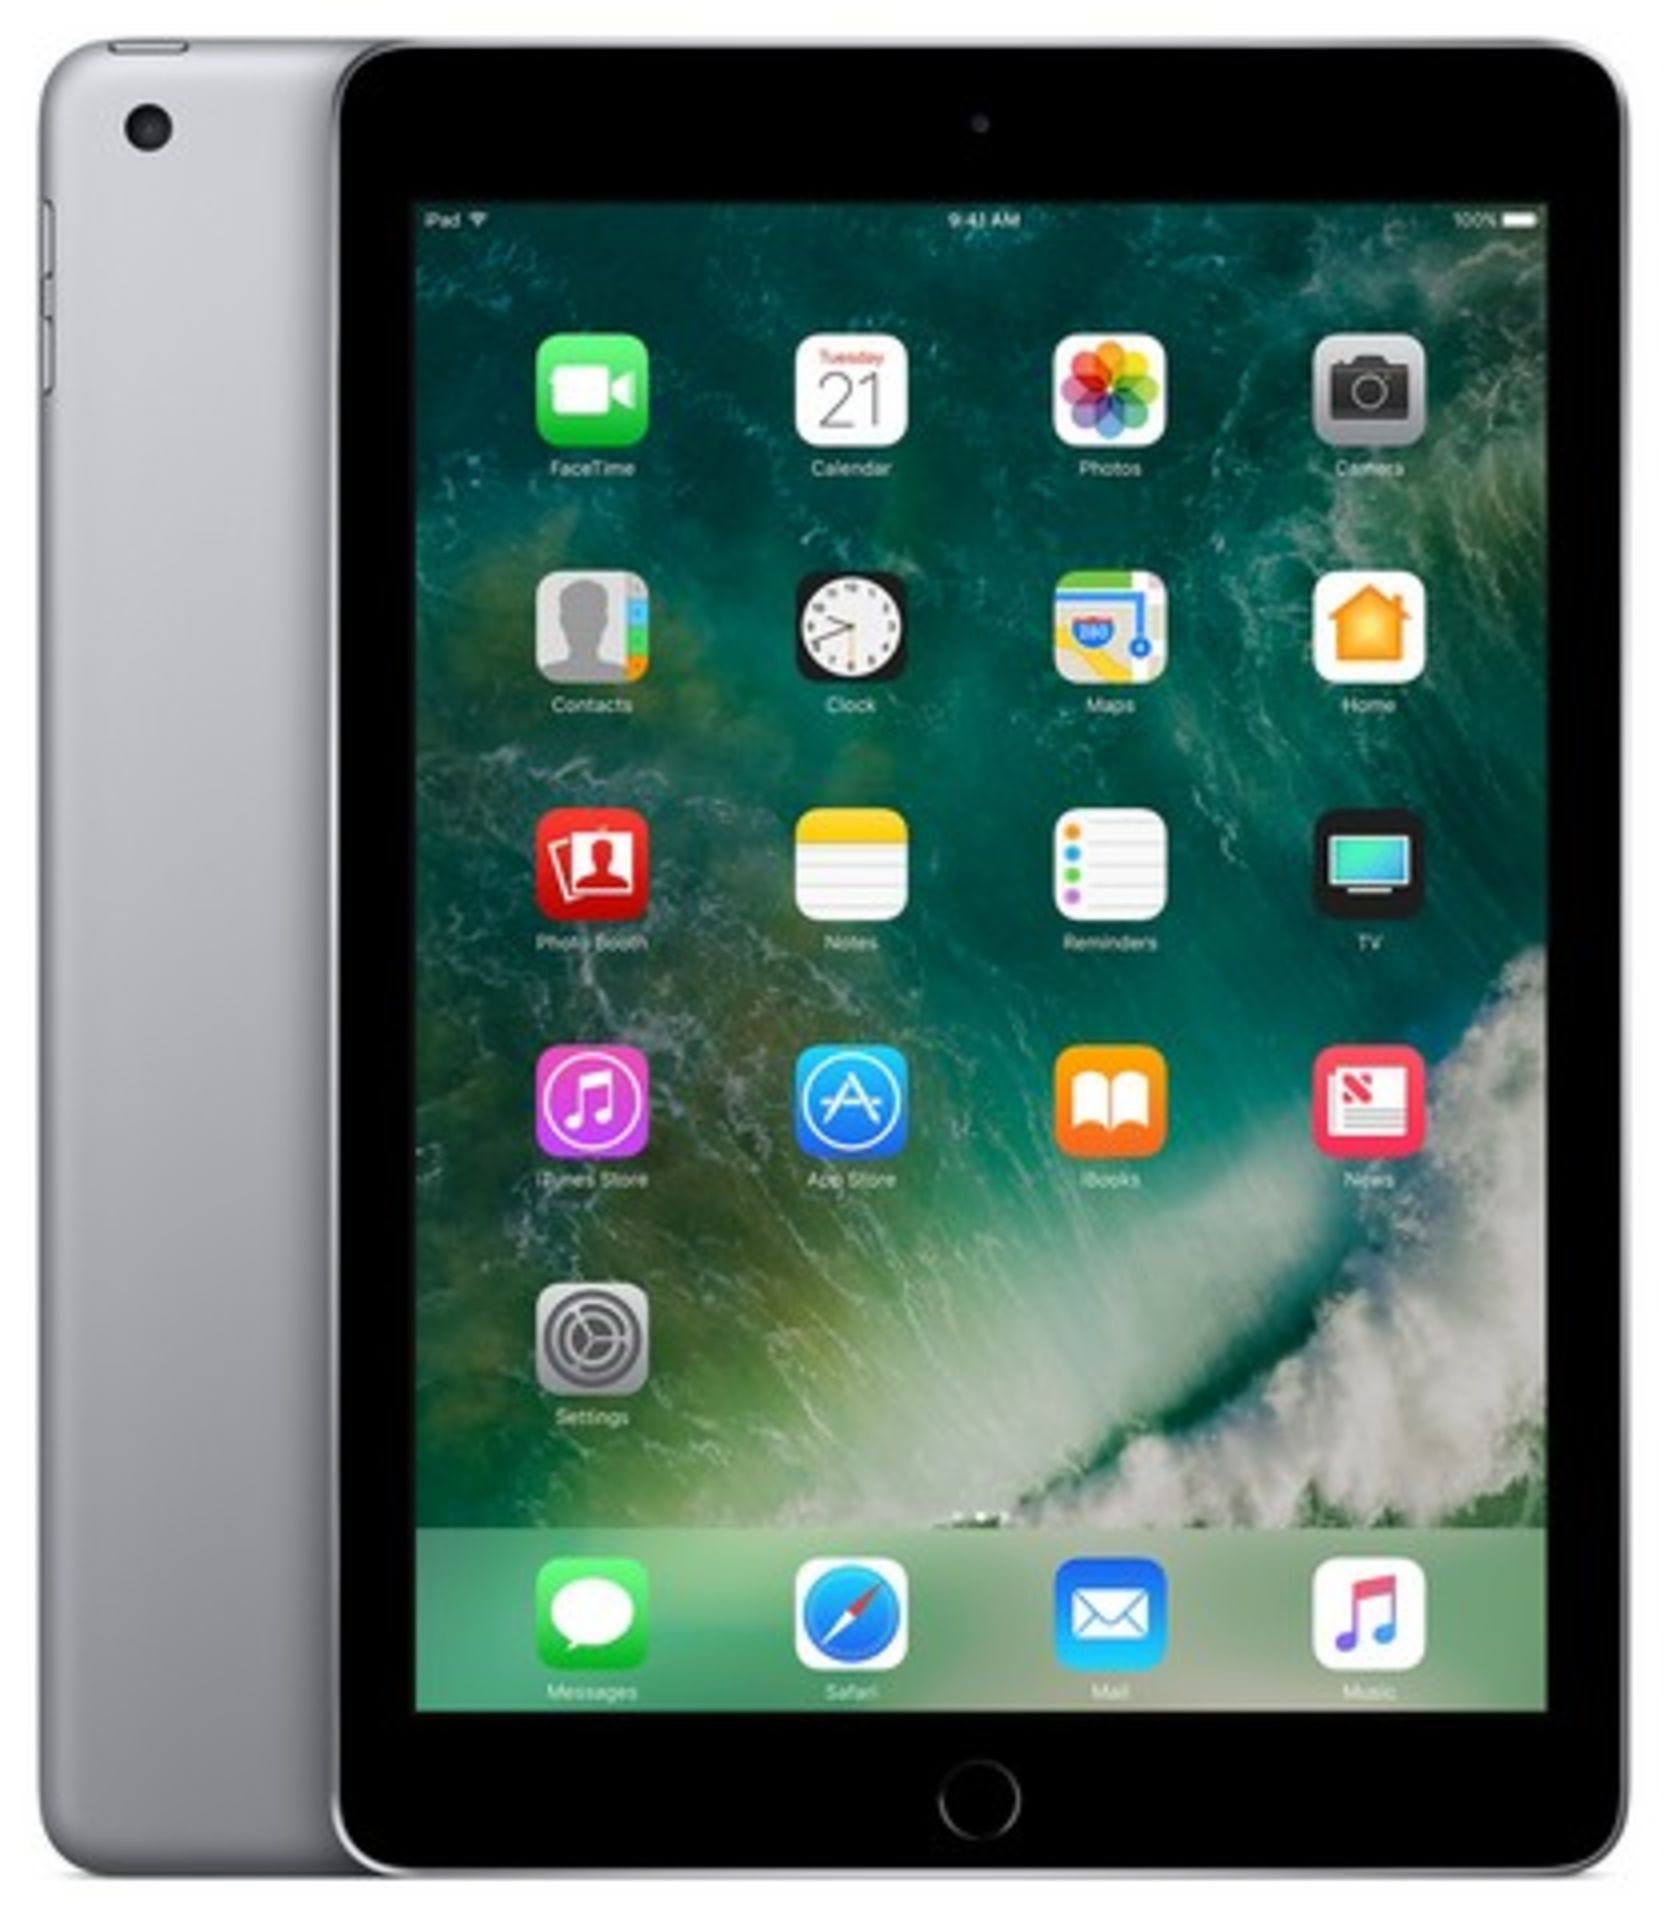 V Grade A Apple iPad Air 16GB Space Grey - Wi-Fi - In Generic Box With Apple Accessories